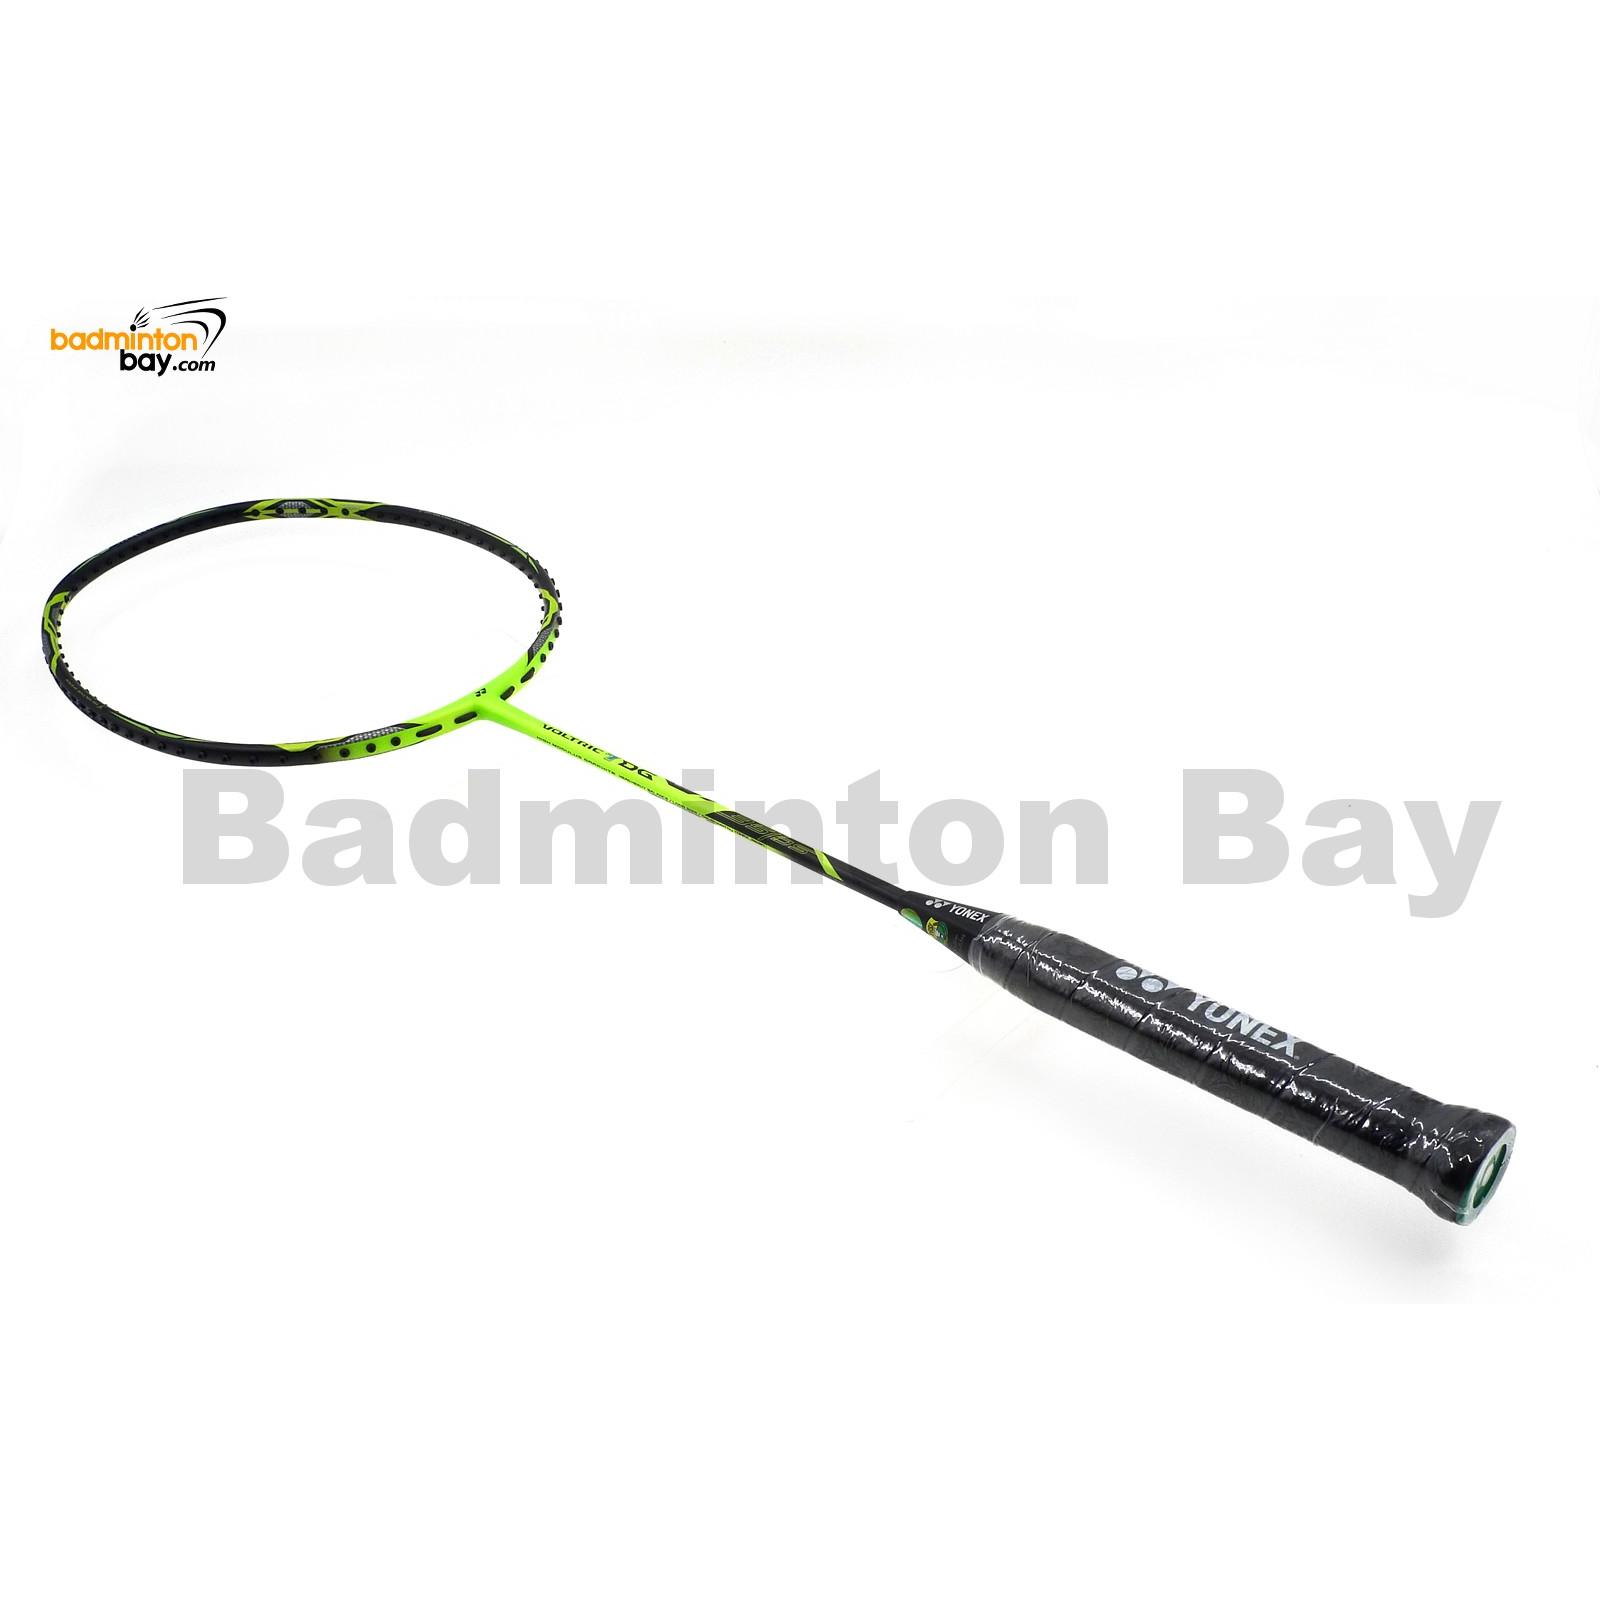 Yonex Badminton Racket VOLTRIC 7 DG White Lime Racquet String 3UG5 with Cover 